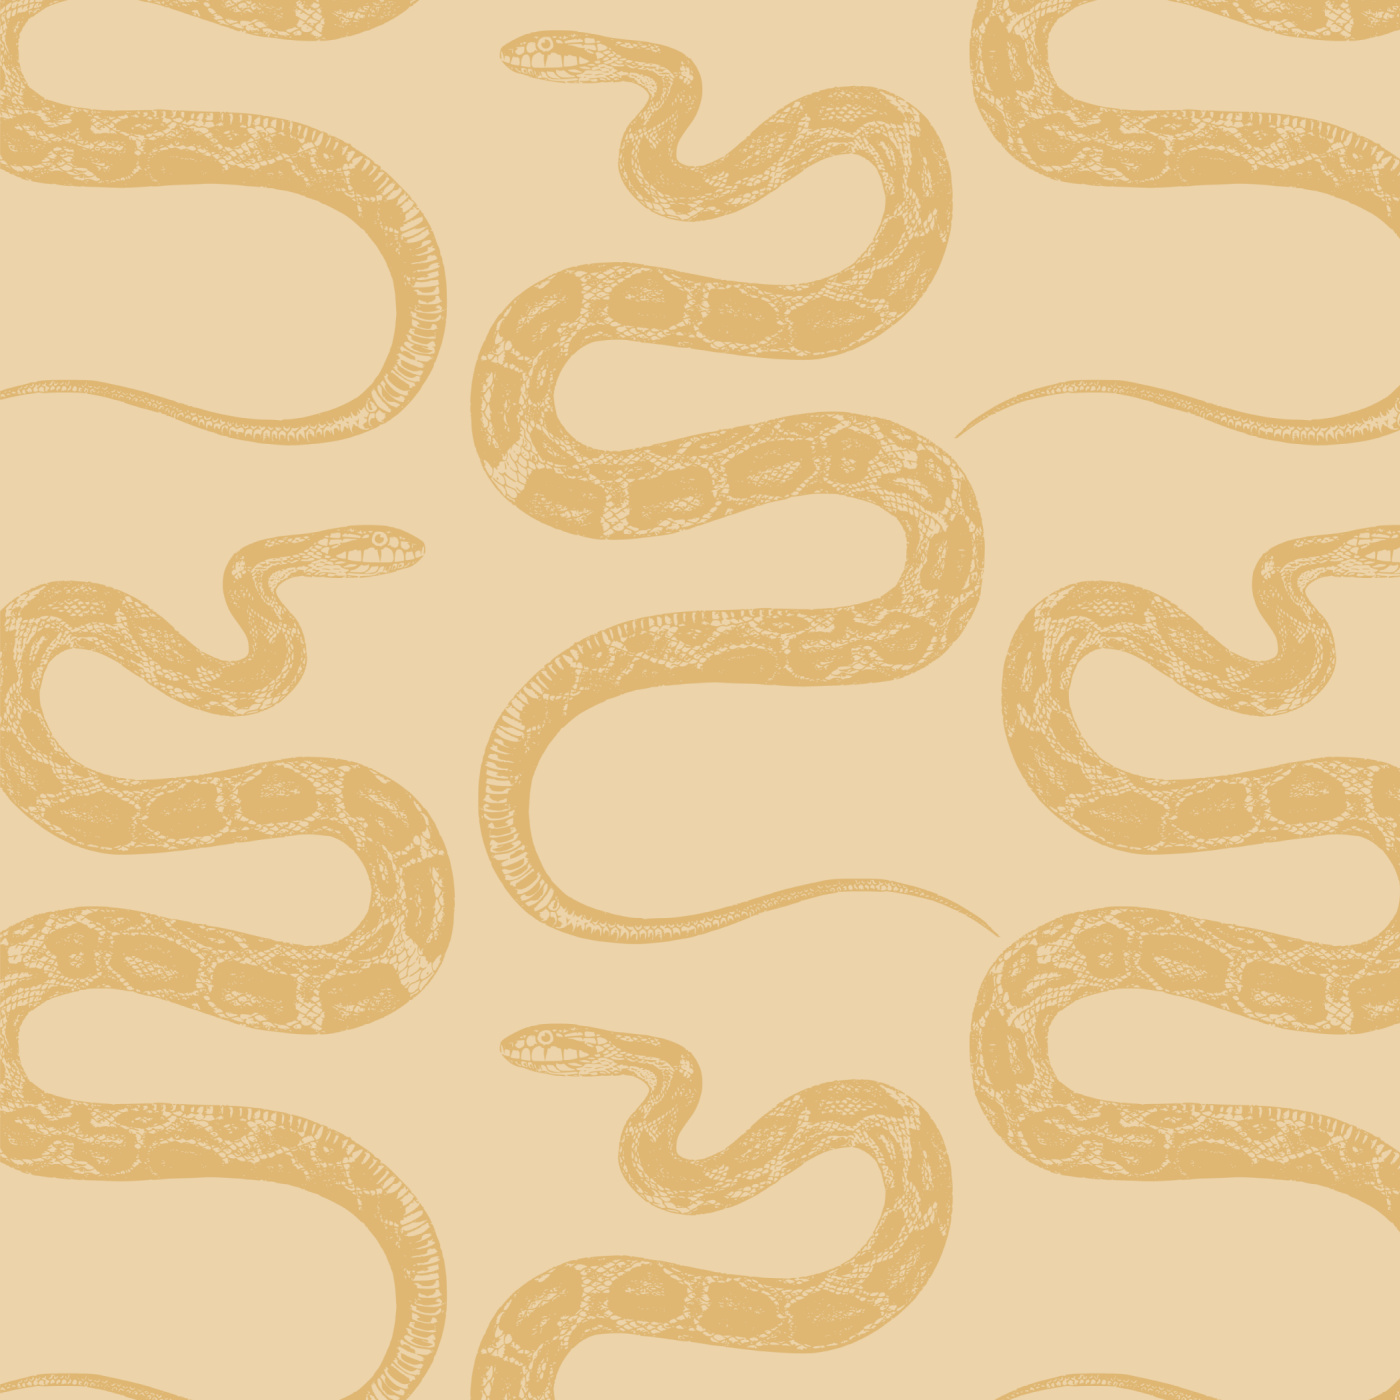 Snake Fabric, Wallpaper and Home Decor